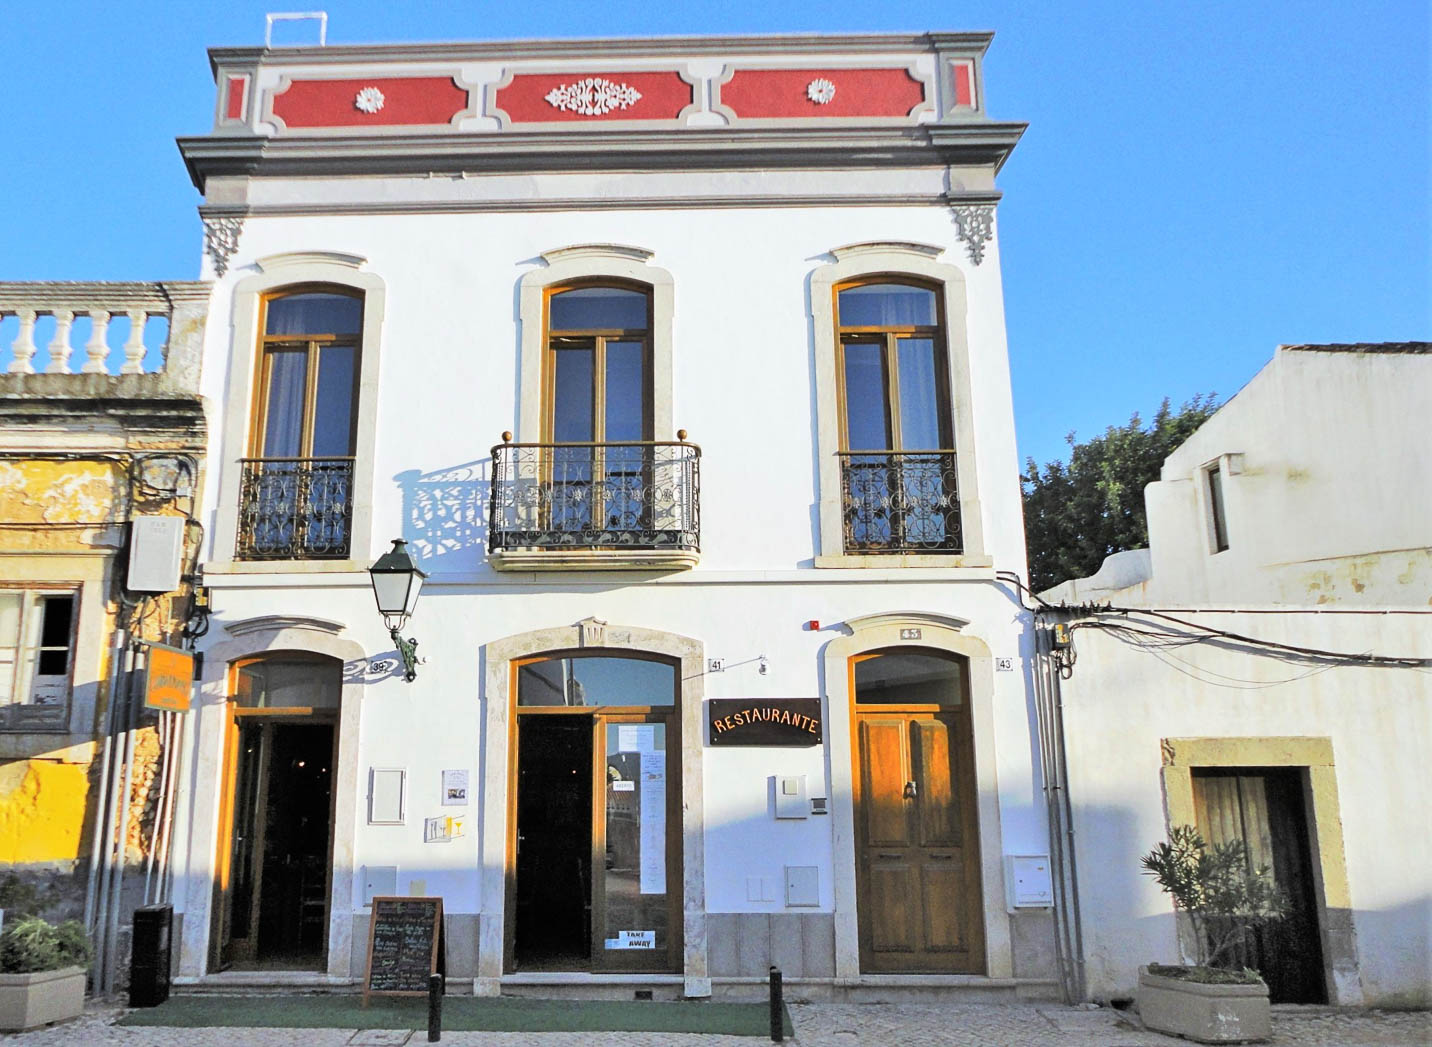 Townhouse with Restaurante and Two Separate Apartments, Estoi